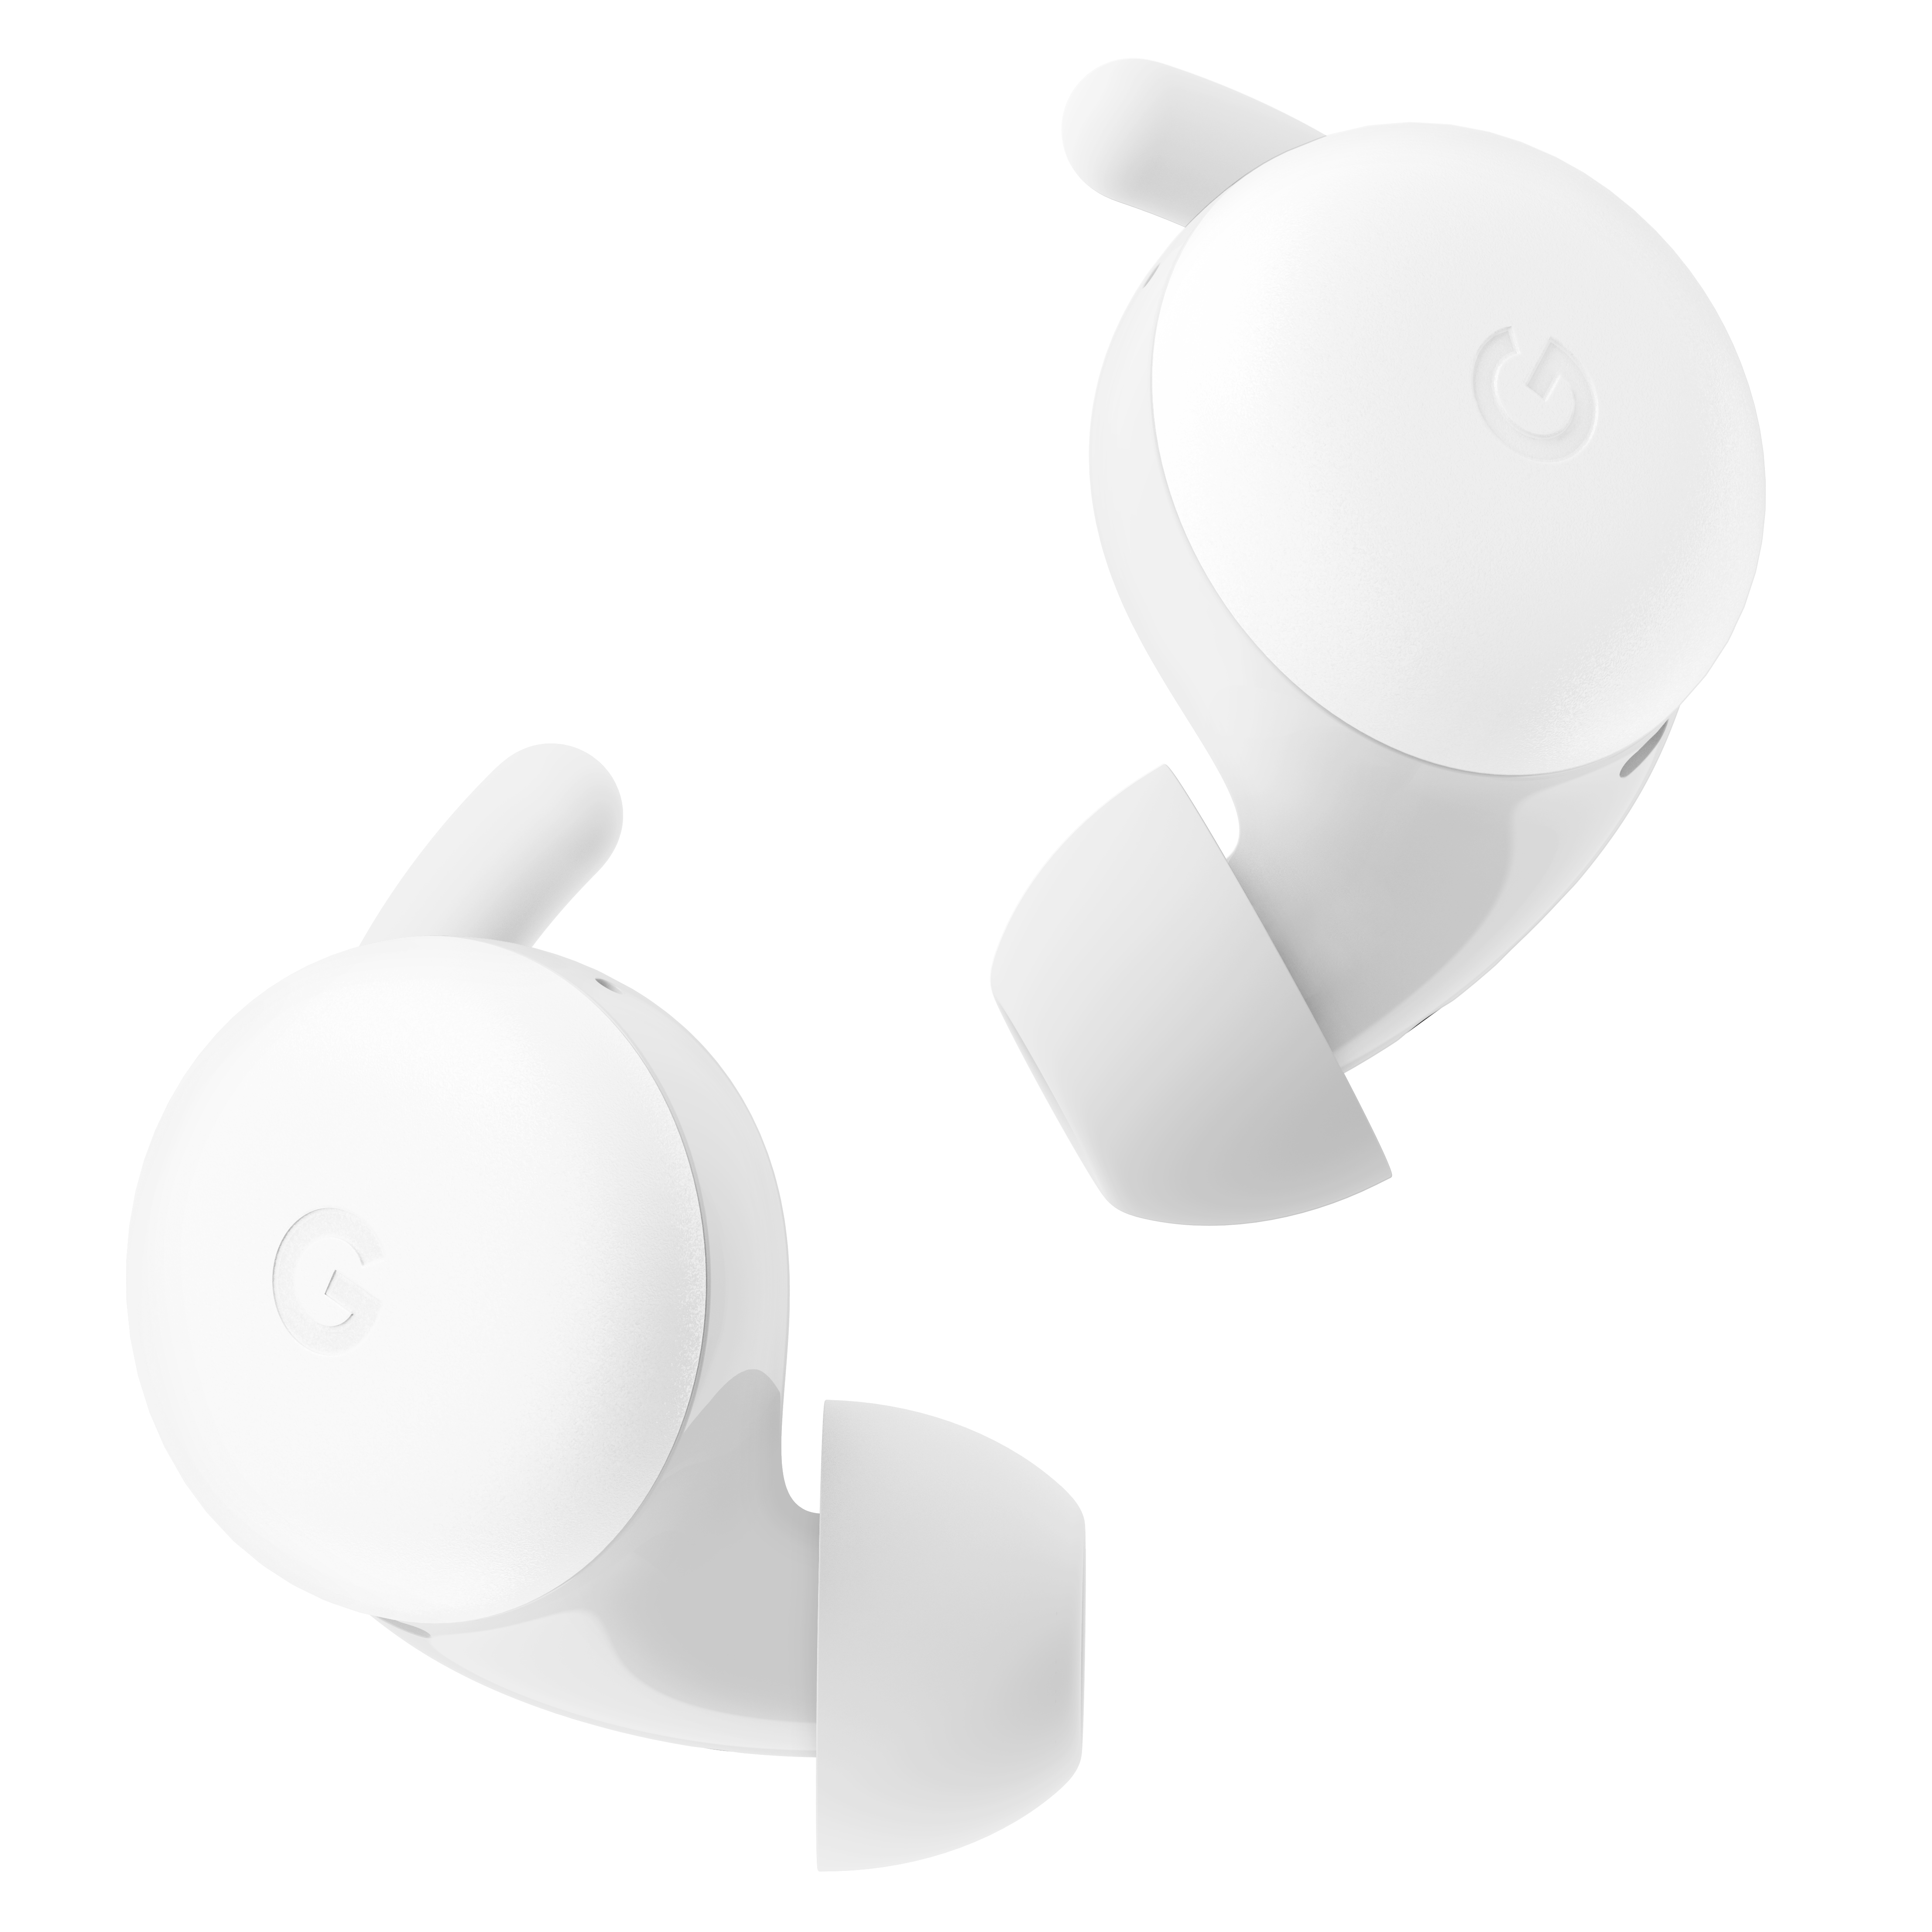 Google Pixel Buds A-Series - Truly Wireless Earbuds - Audio Headphones with Bluetooth - White - image 3 of 8